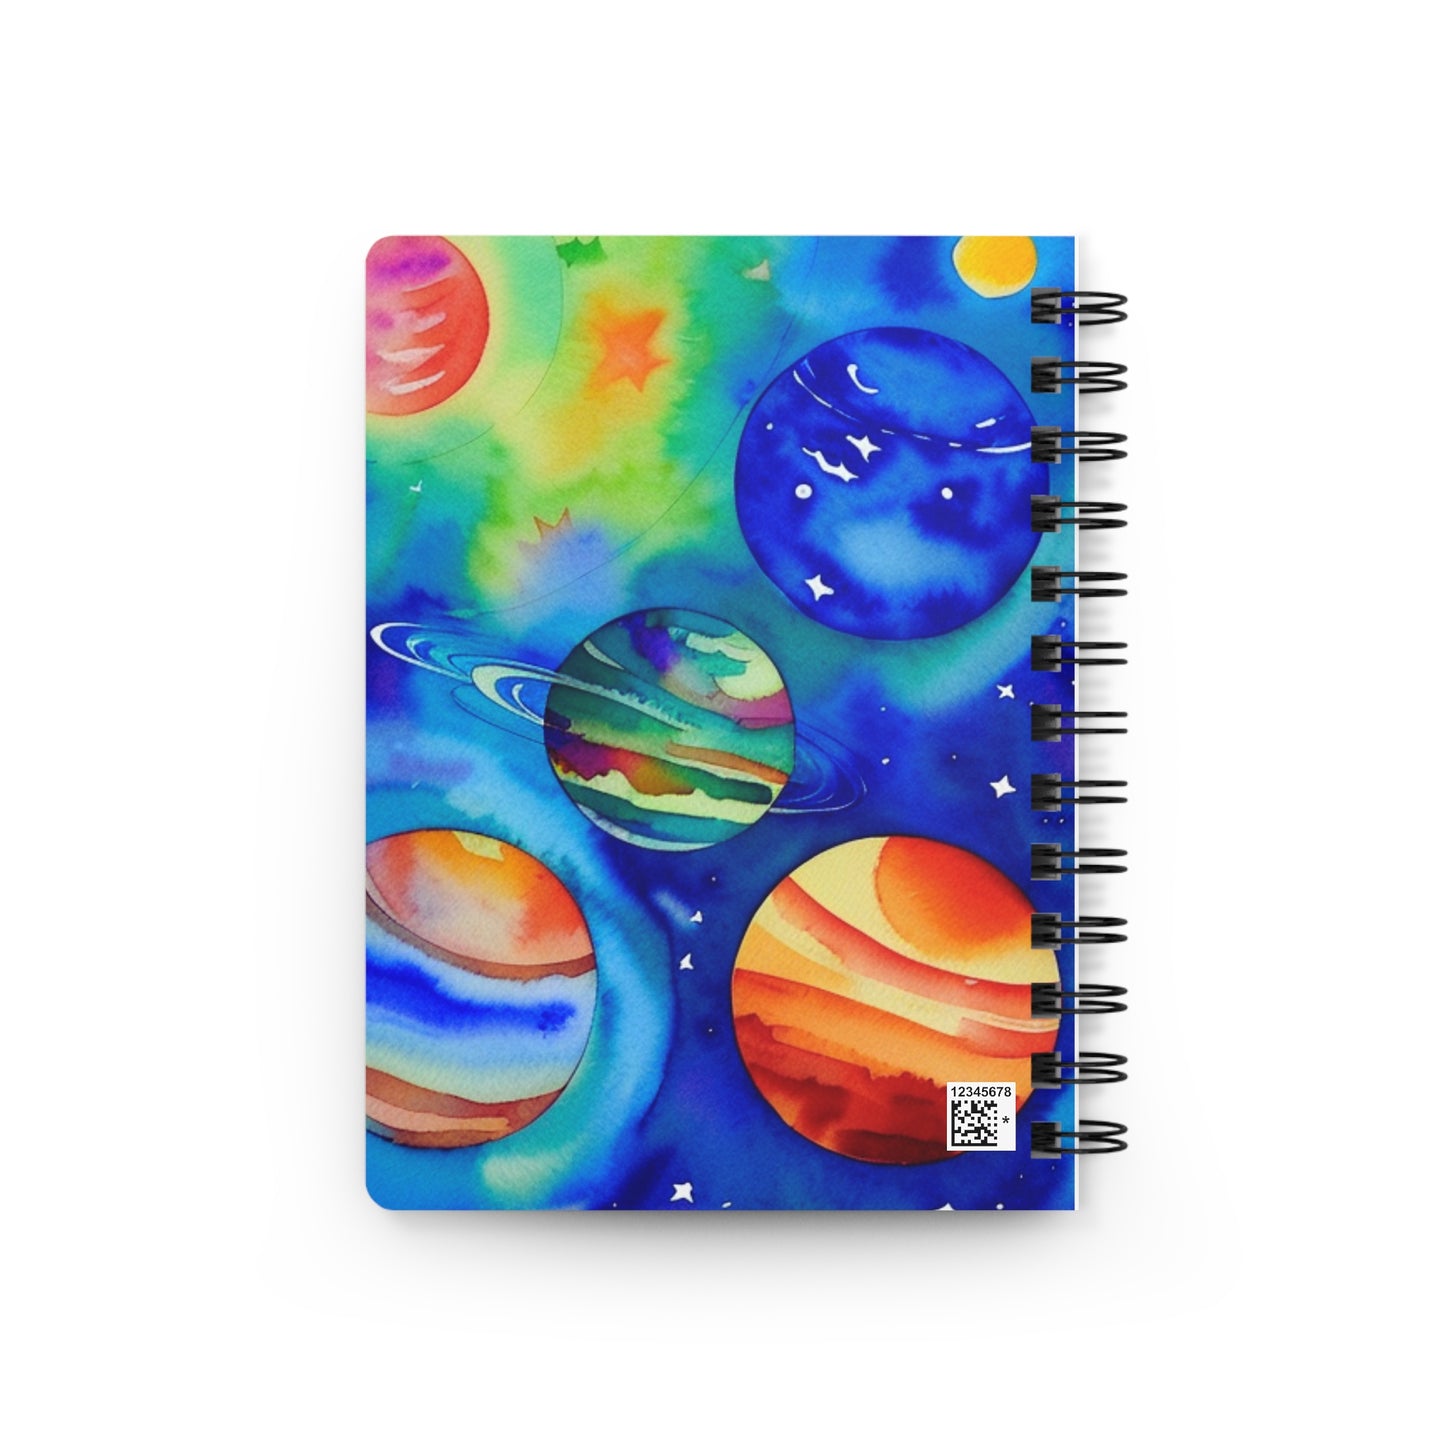 Which Galaxy Are You From? Writing Sketch Inspiration Spiral Bound Journal